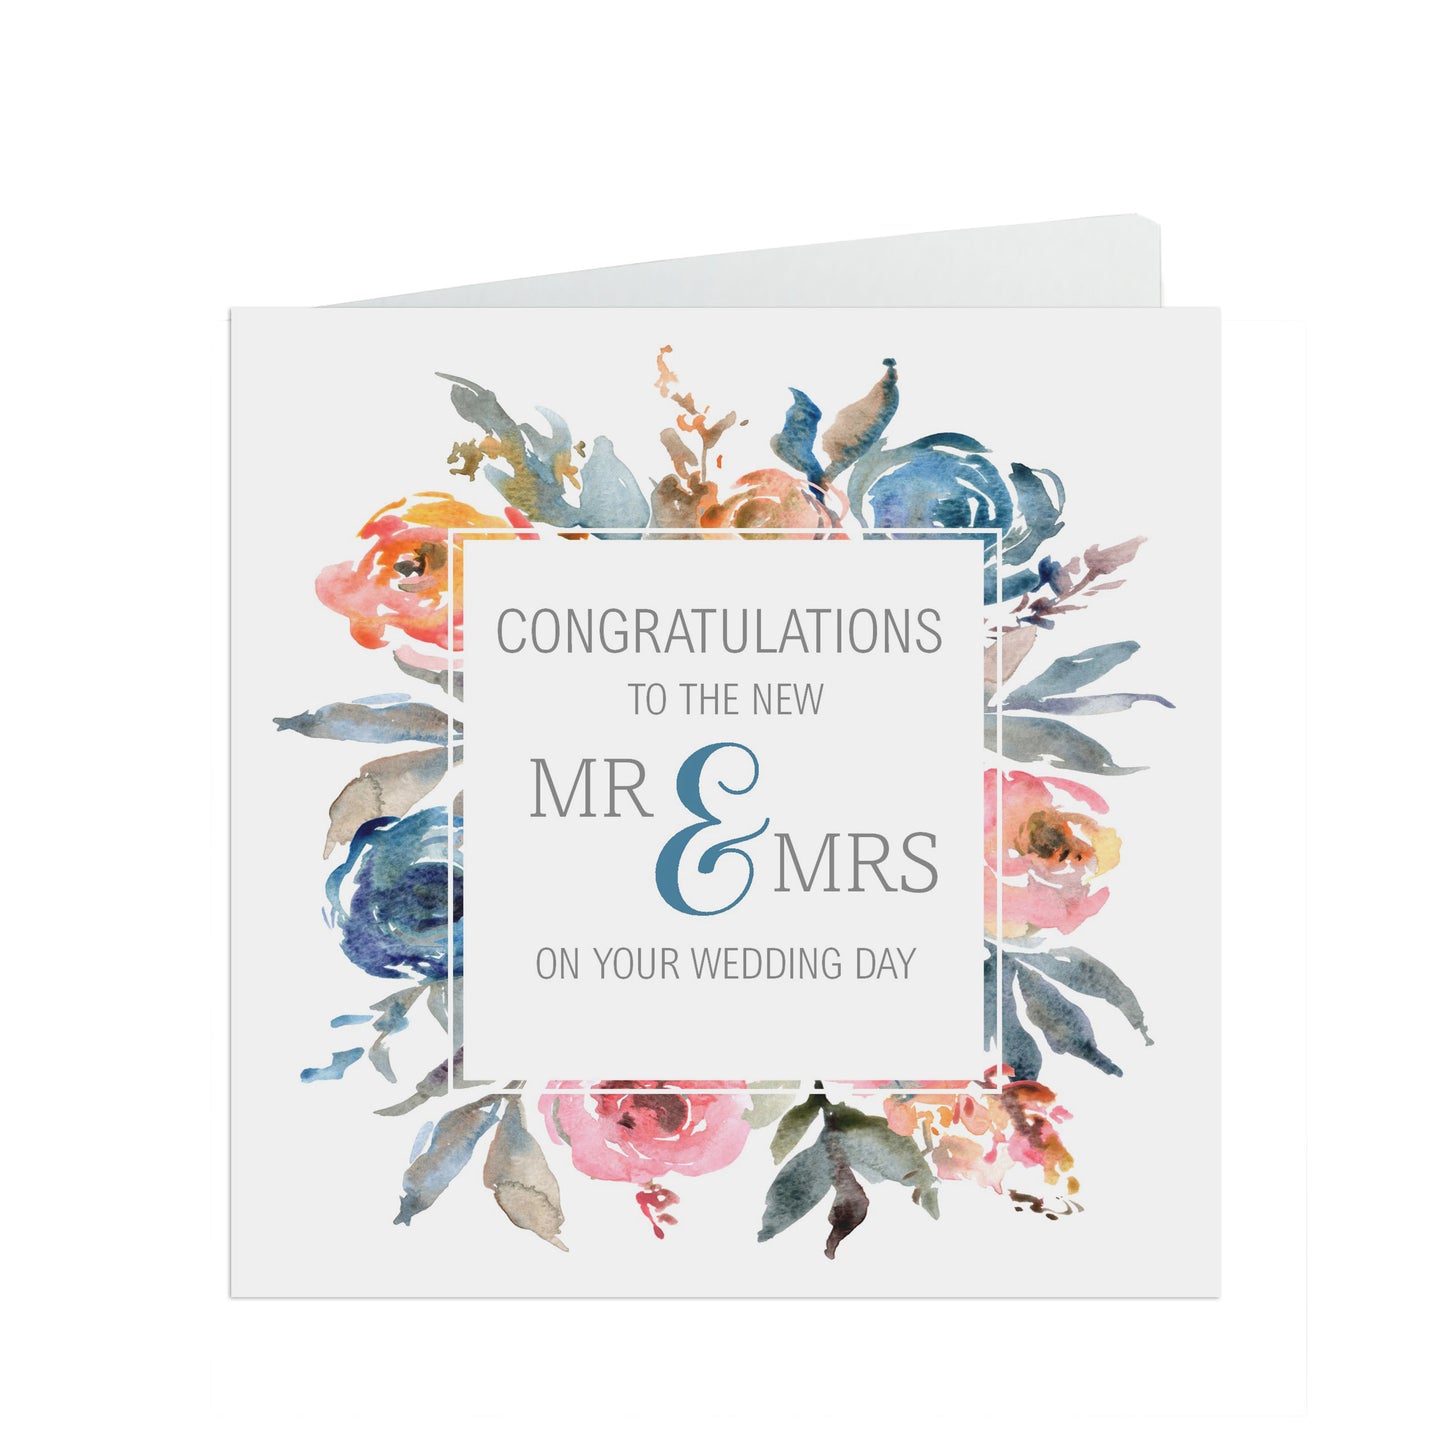 Congratulations To The New Mr & Mrs Wedding Day Card - Blue & Orange